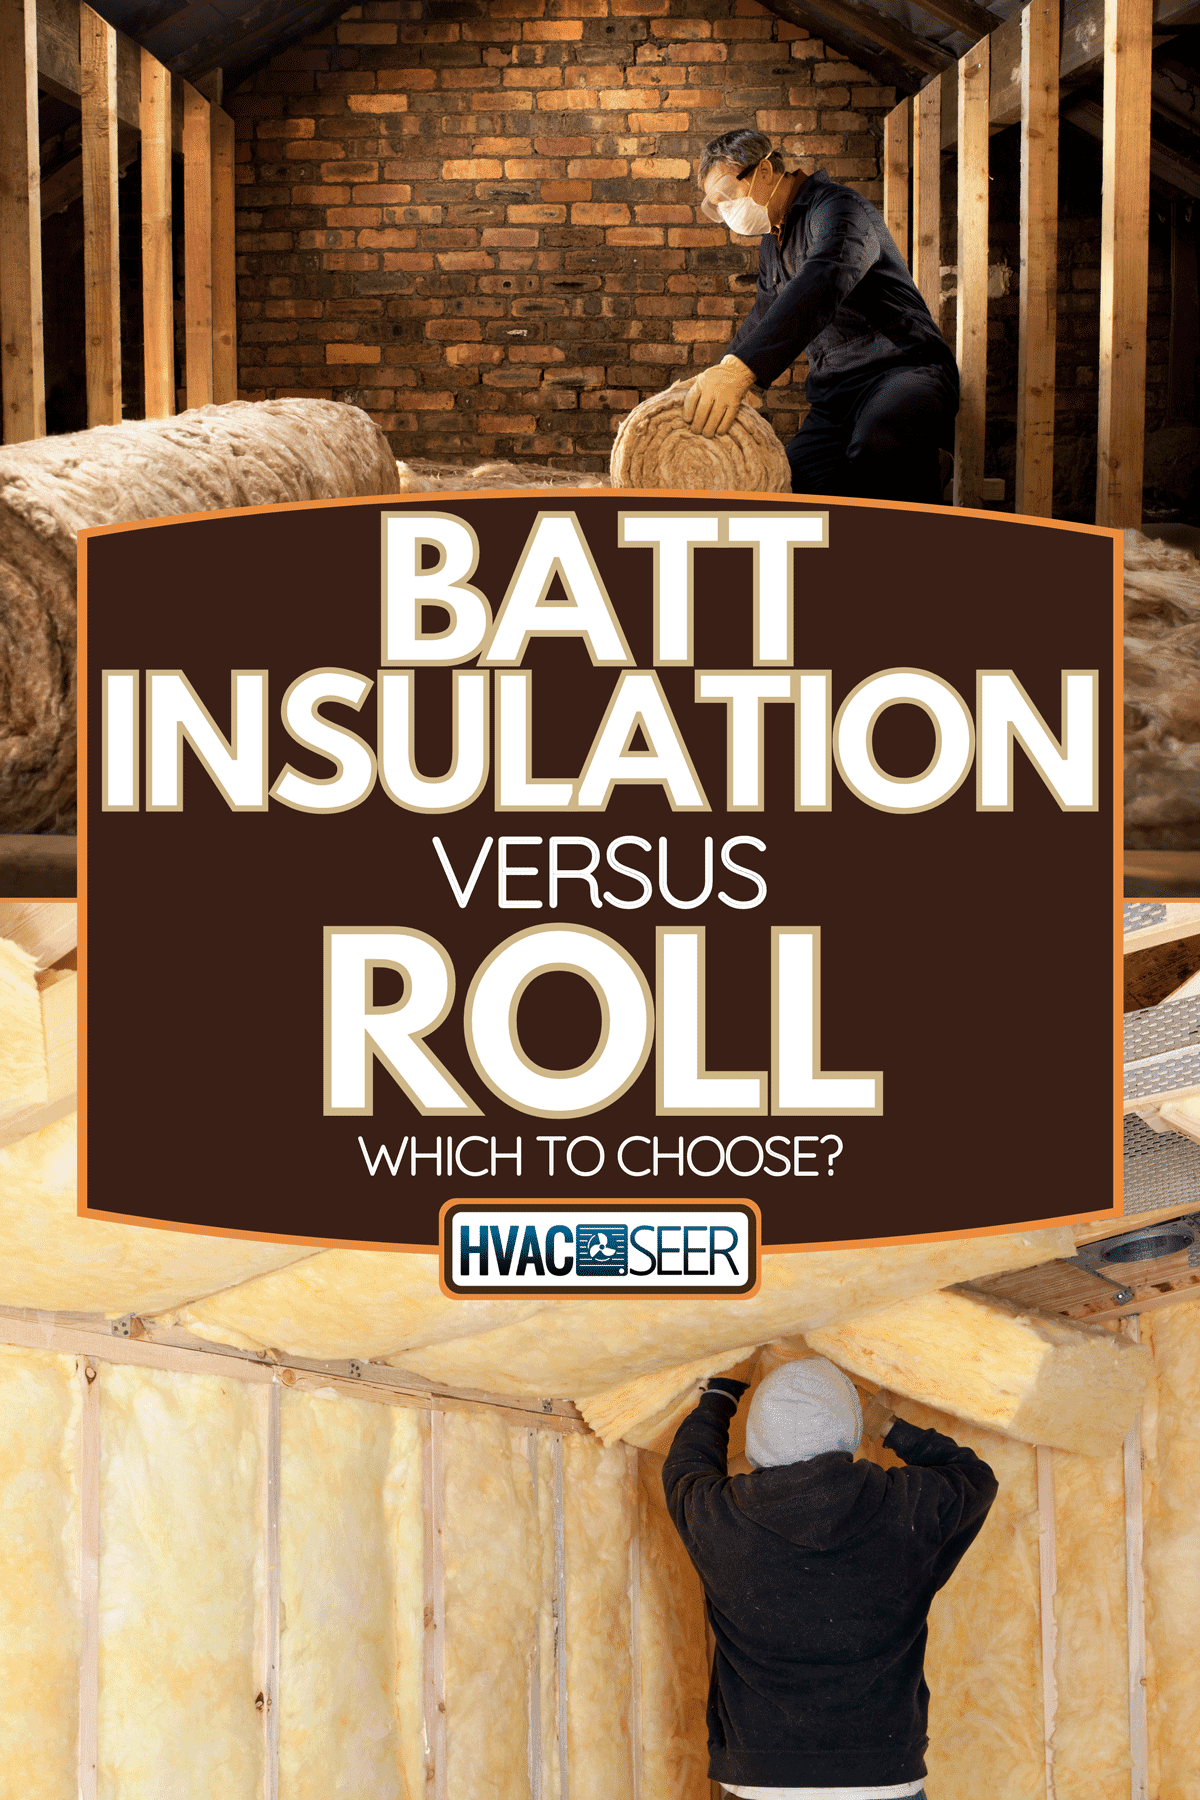 A comparison between batt and roll insulation, Batt Insulation Vs. Roll: Which To Choose?